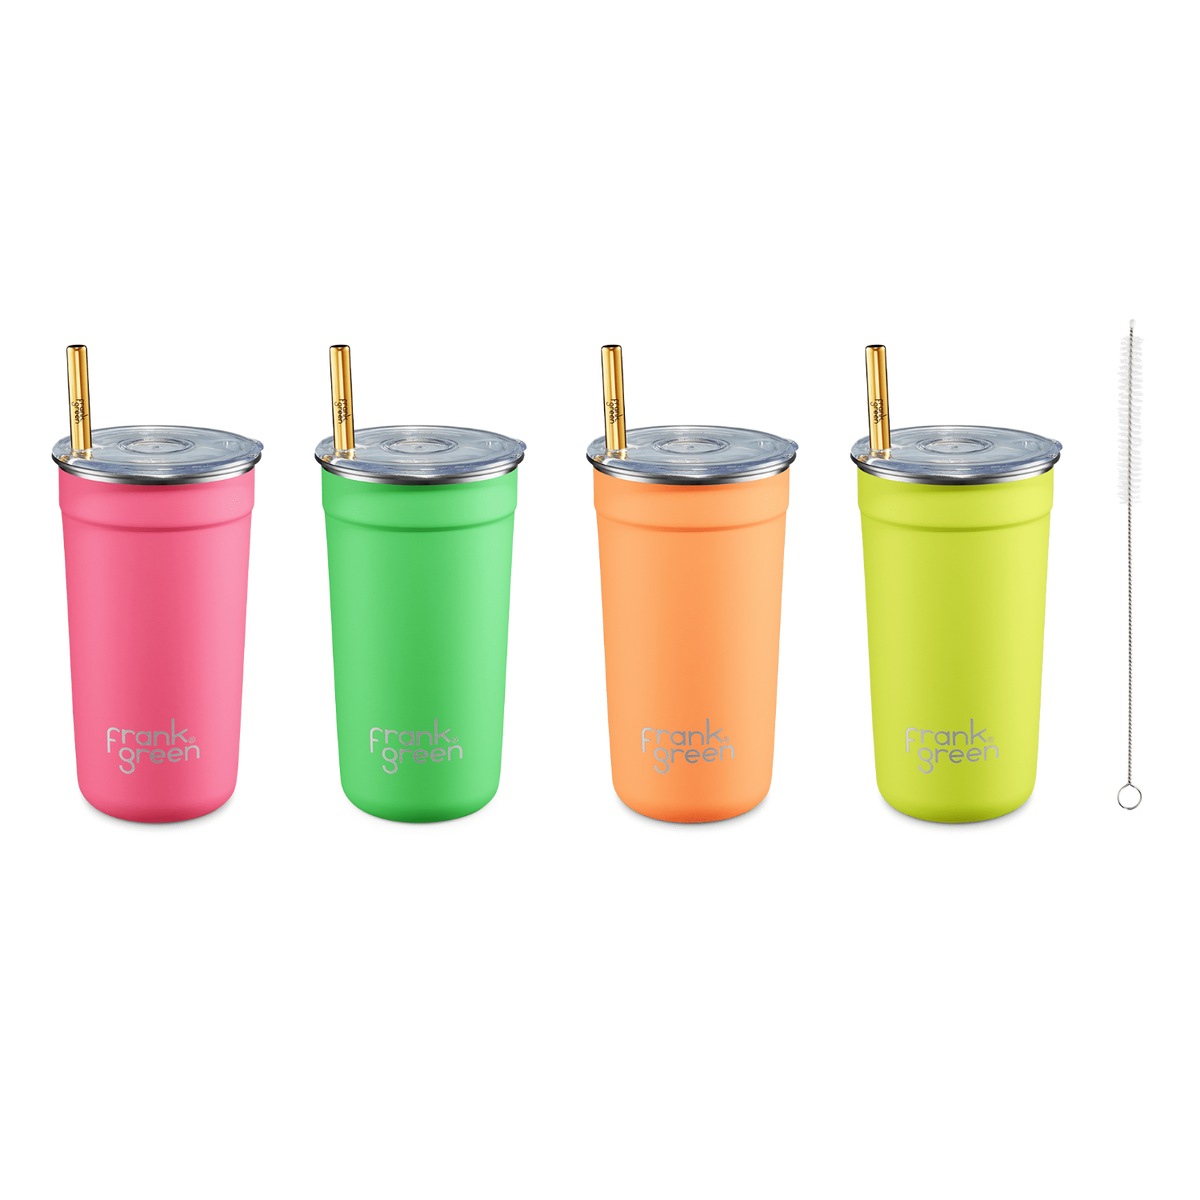 Frank Green-Reusable Party Cups 4-Pack - 16oz - EarthHero